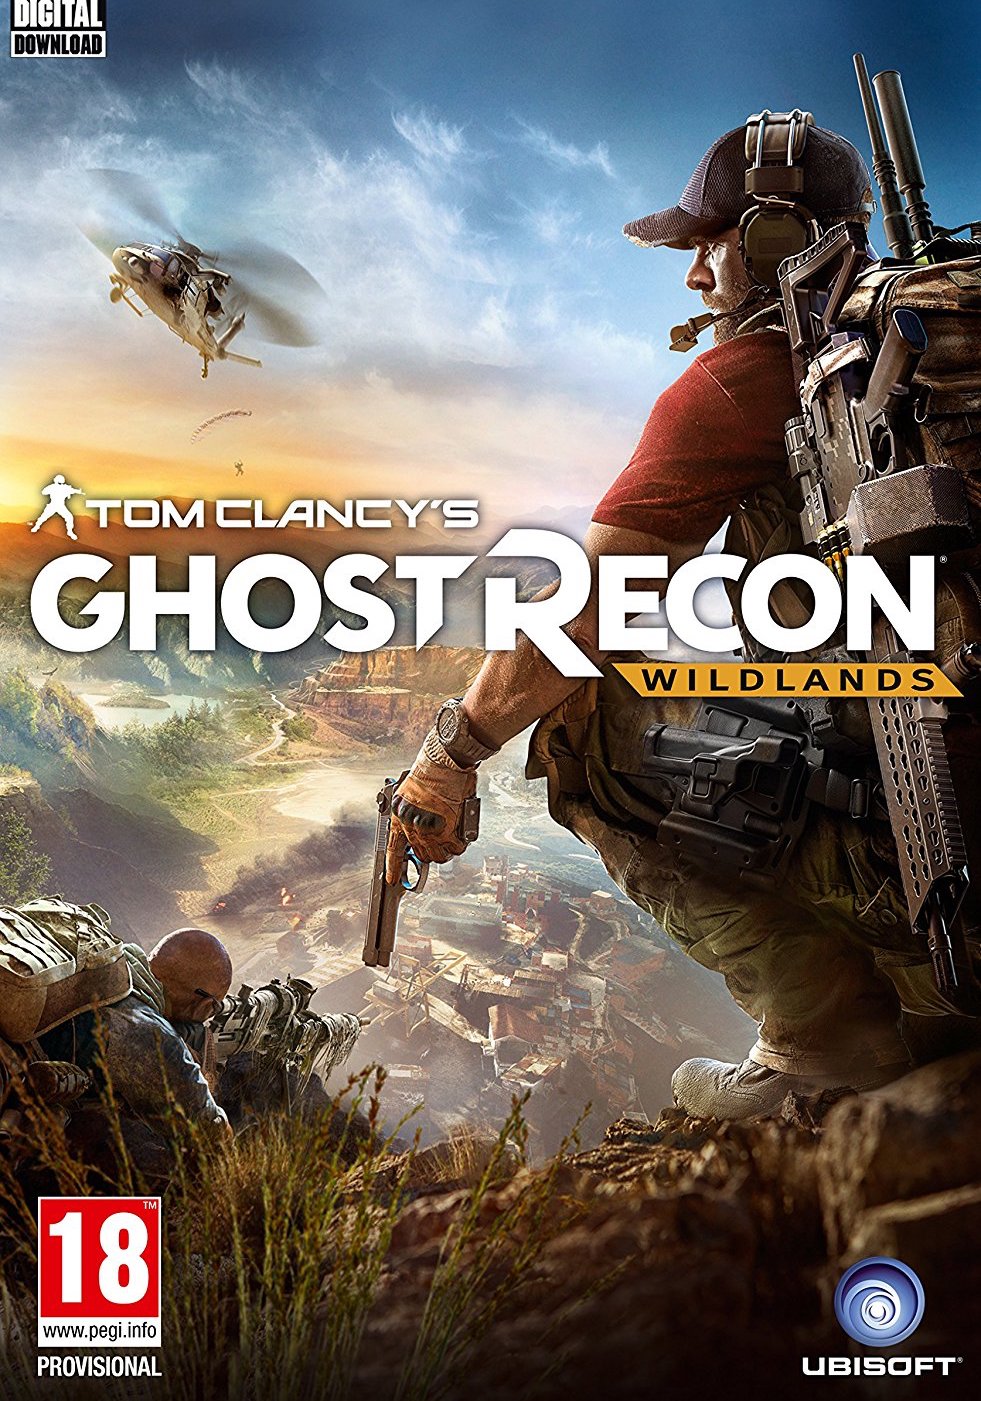 Tom Clancy's Ghost Recon Wildlands CD Key For Uplay: Deluxe Edition - 